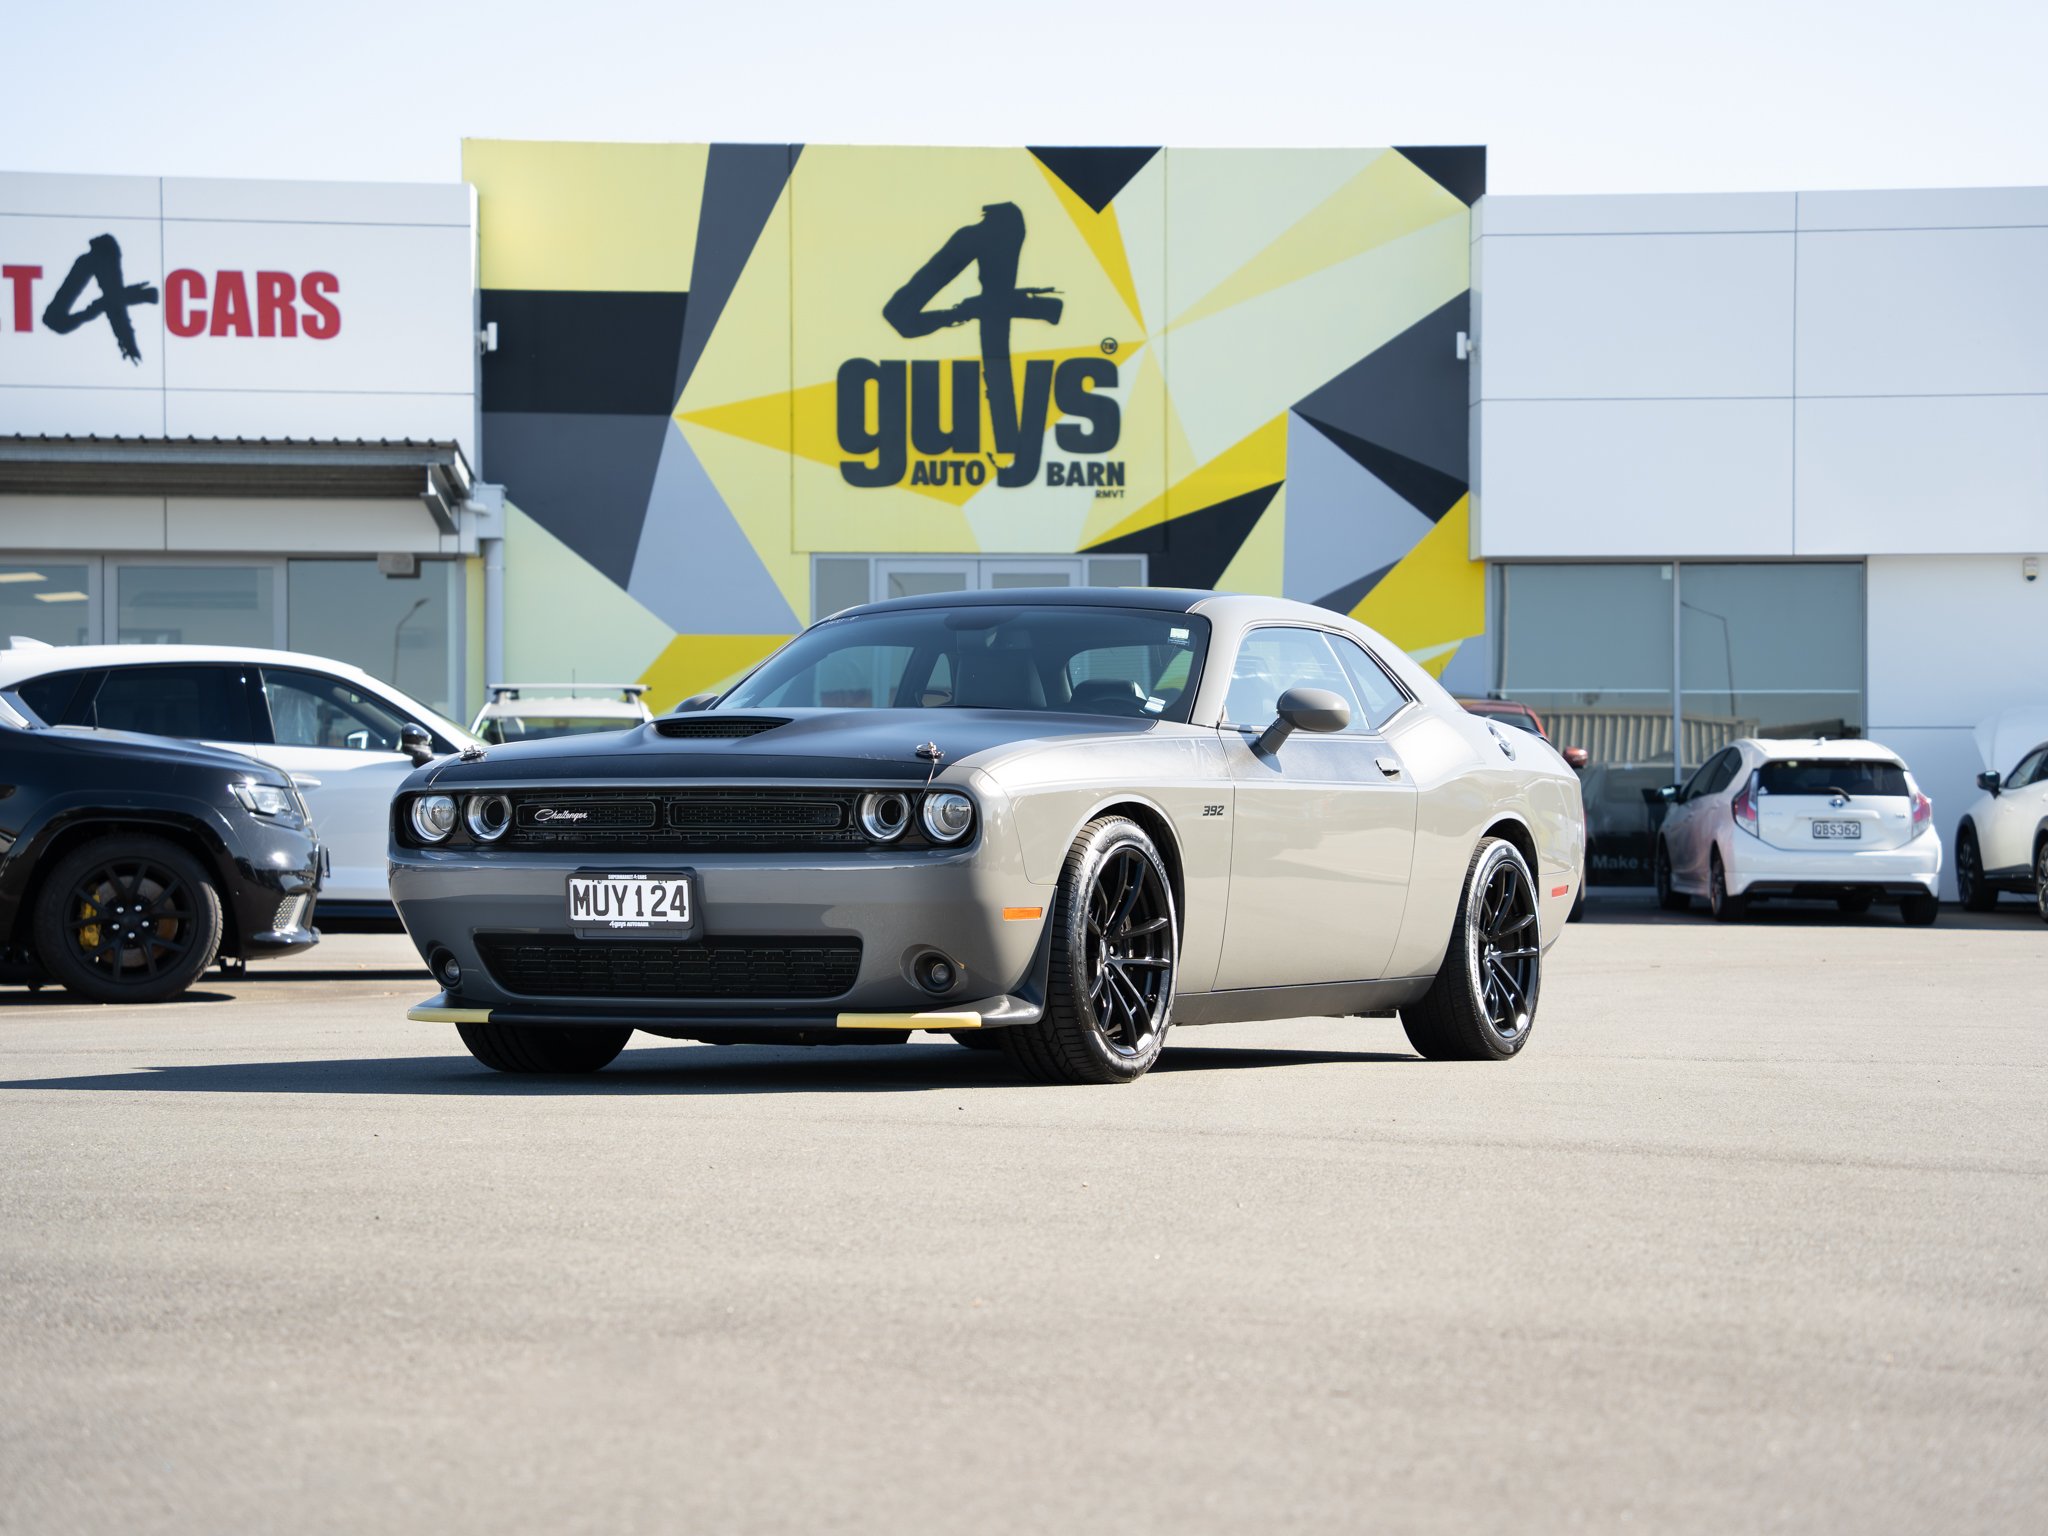 🔥JUST ARRIVED!🔥 2018 Dodge Challenger T/A (TRANSAM) for $84,800 NZD. 

With a car this hot, who needs a heater this winter? Come down and see it before someone else decides they're in need of a speed upgrade! 

#4Guys #NewZealand #Dodge #Challenger